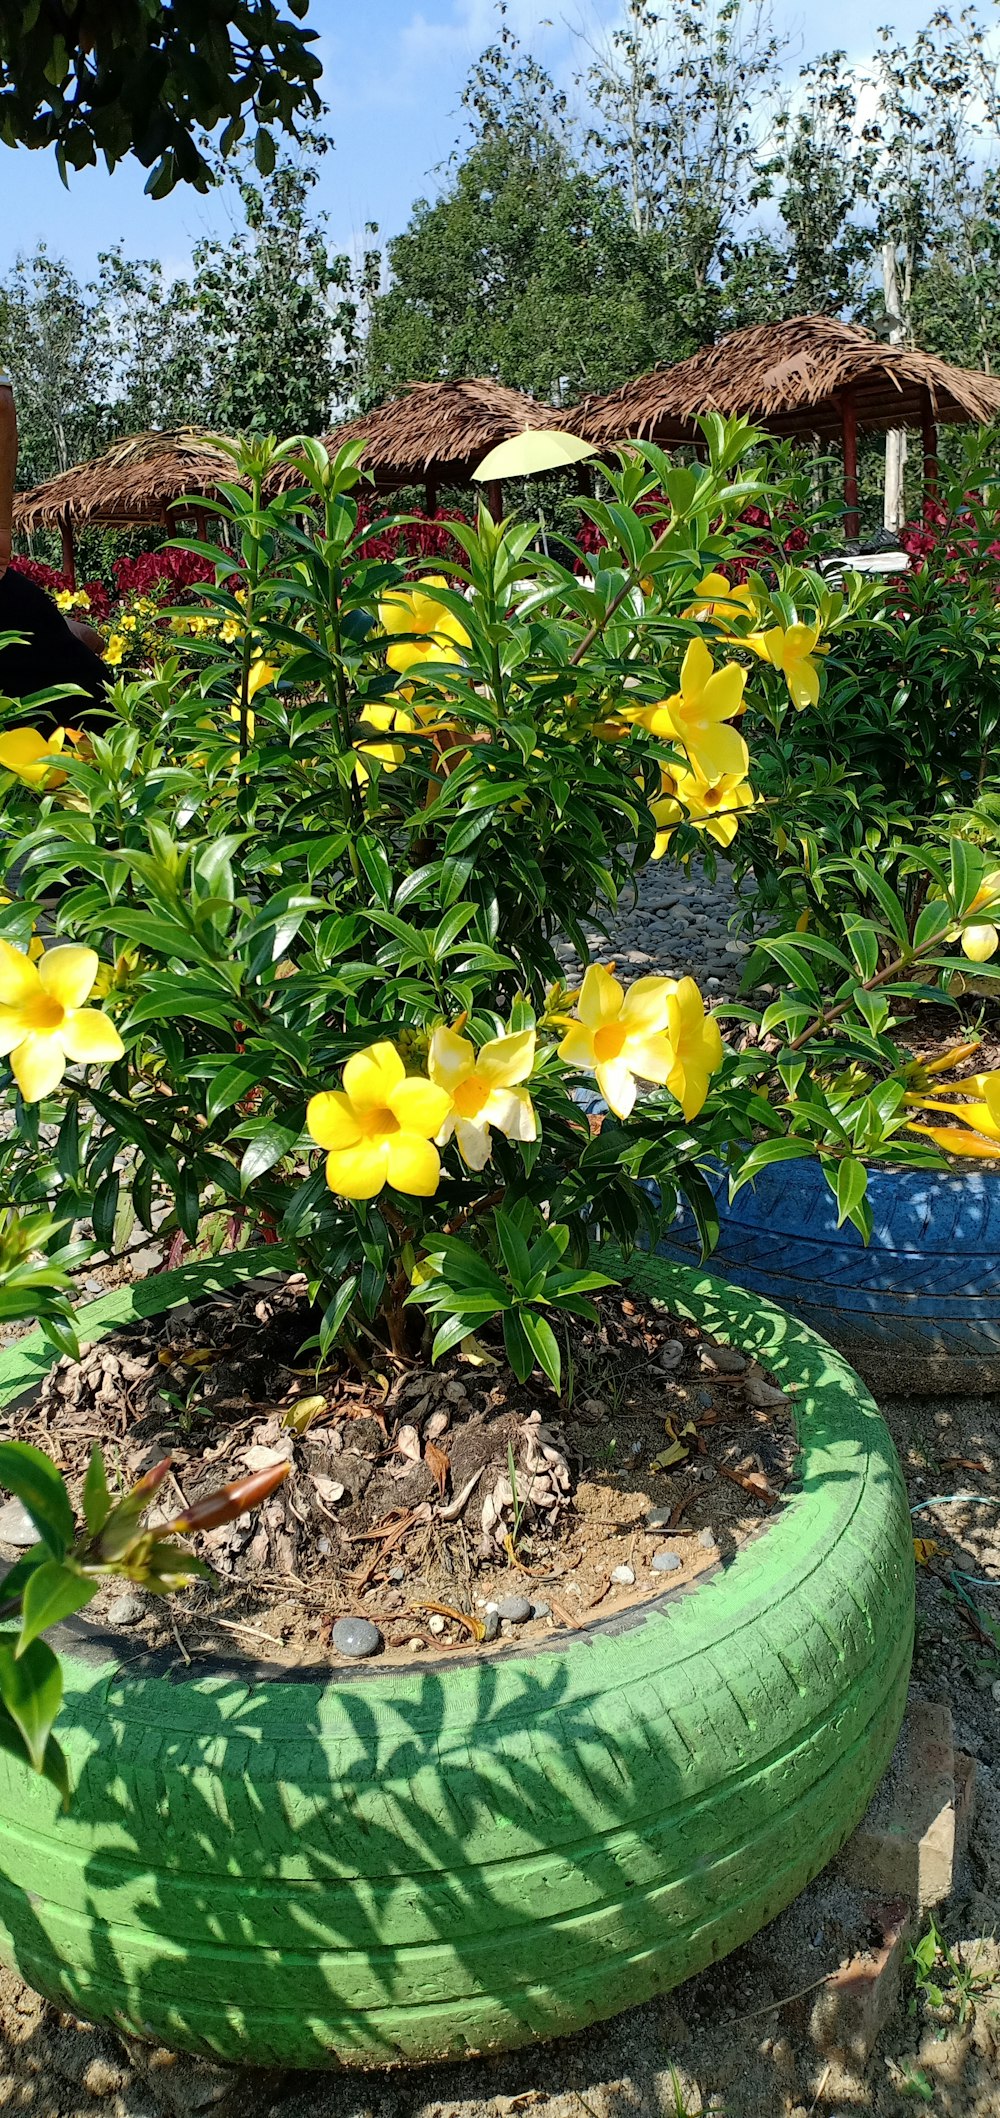 a plant with yellow flowers in a garden